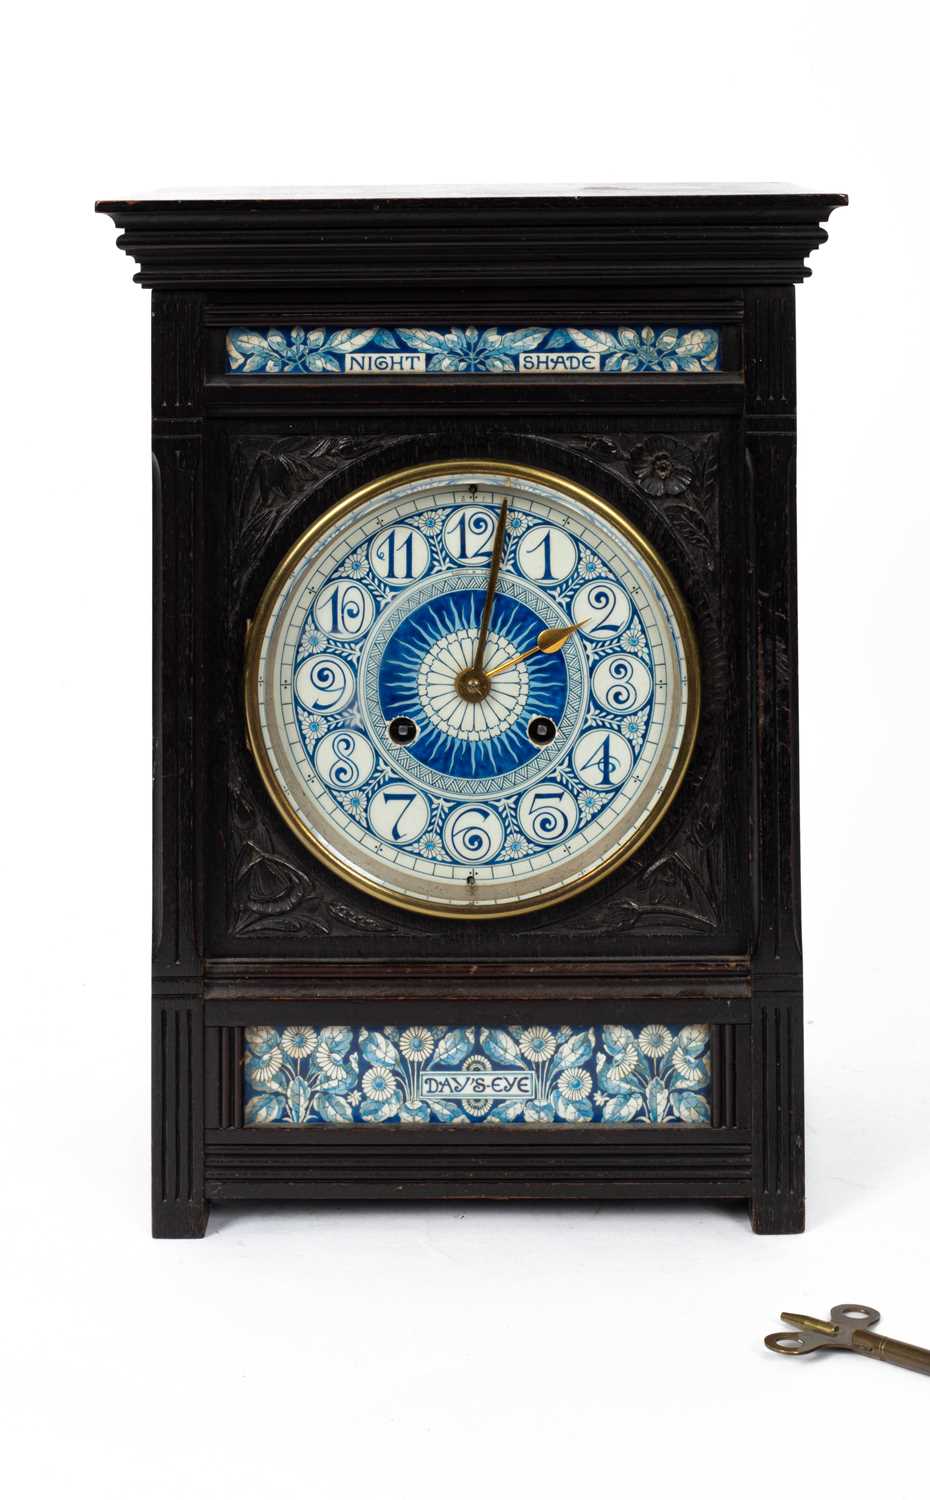 Lot 12 - Lewis Foreman Day (1845-1910) An Arts and Crafts porcelain mounted ebonised mantel clock